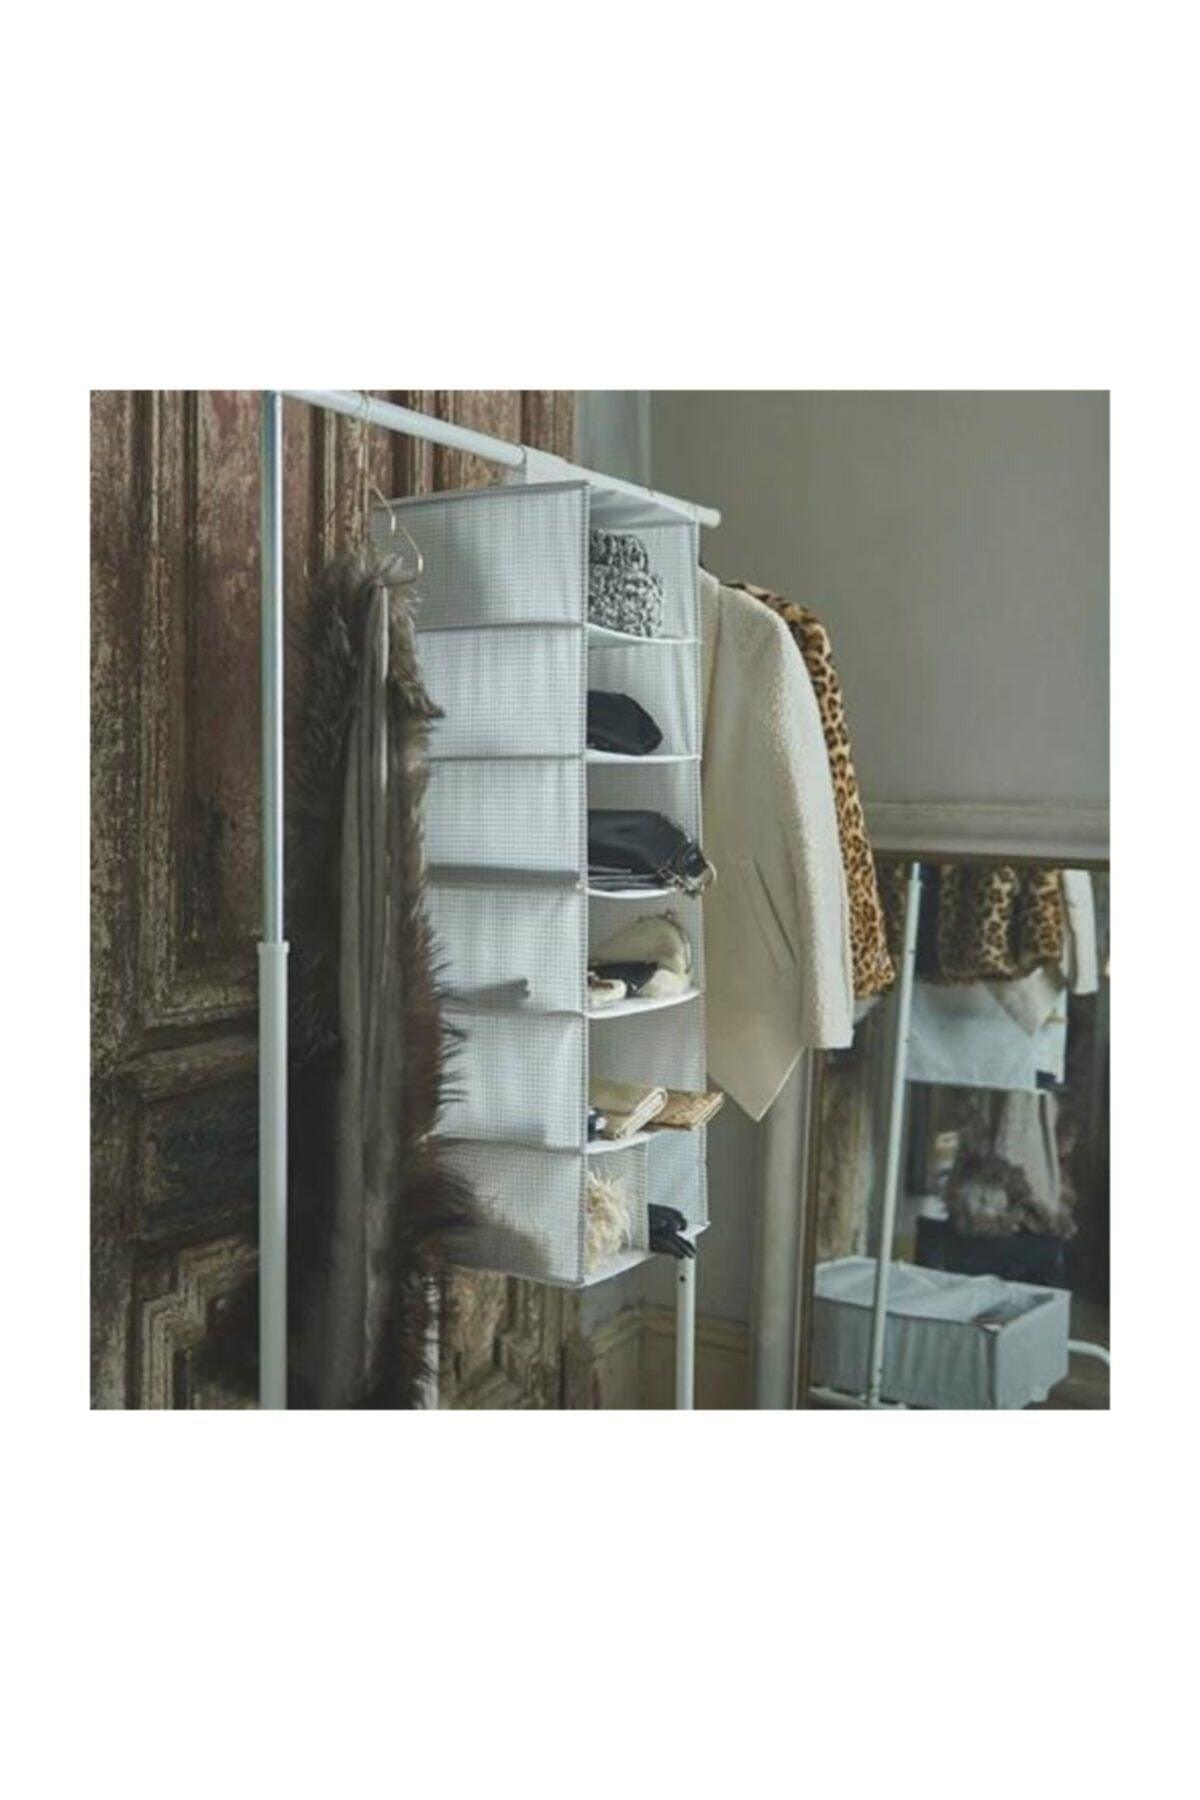 Stuk Cabinet With Hanging Compartments Or Hanger